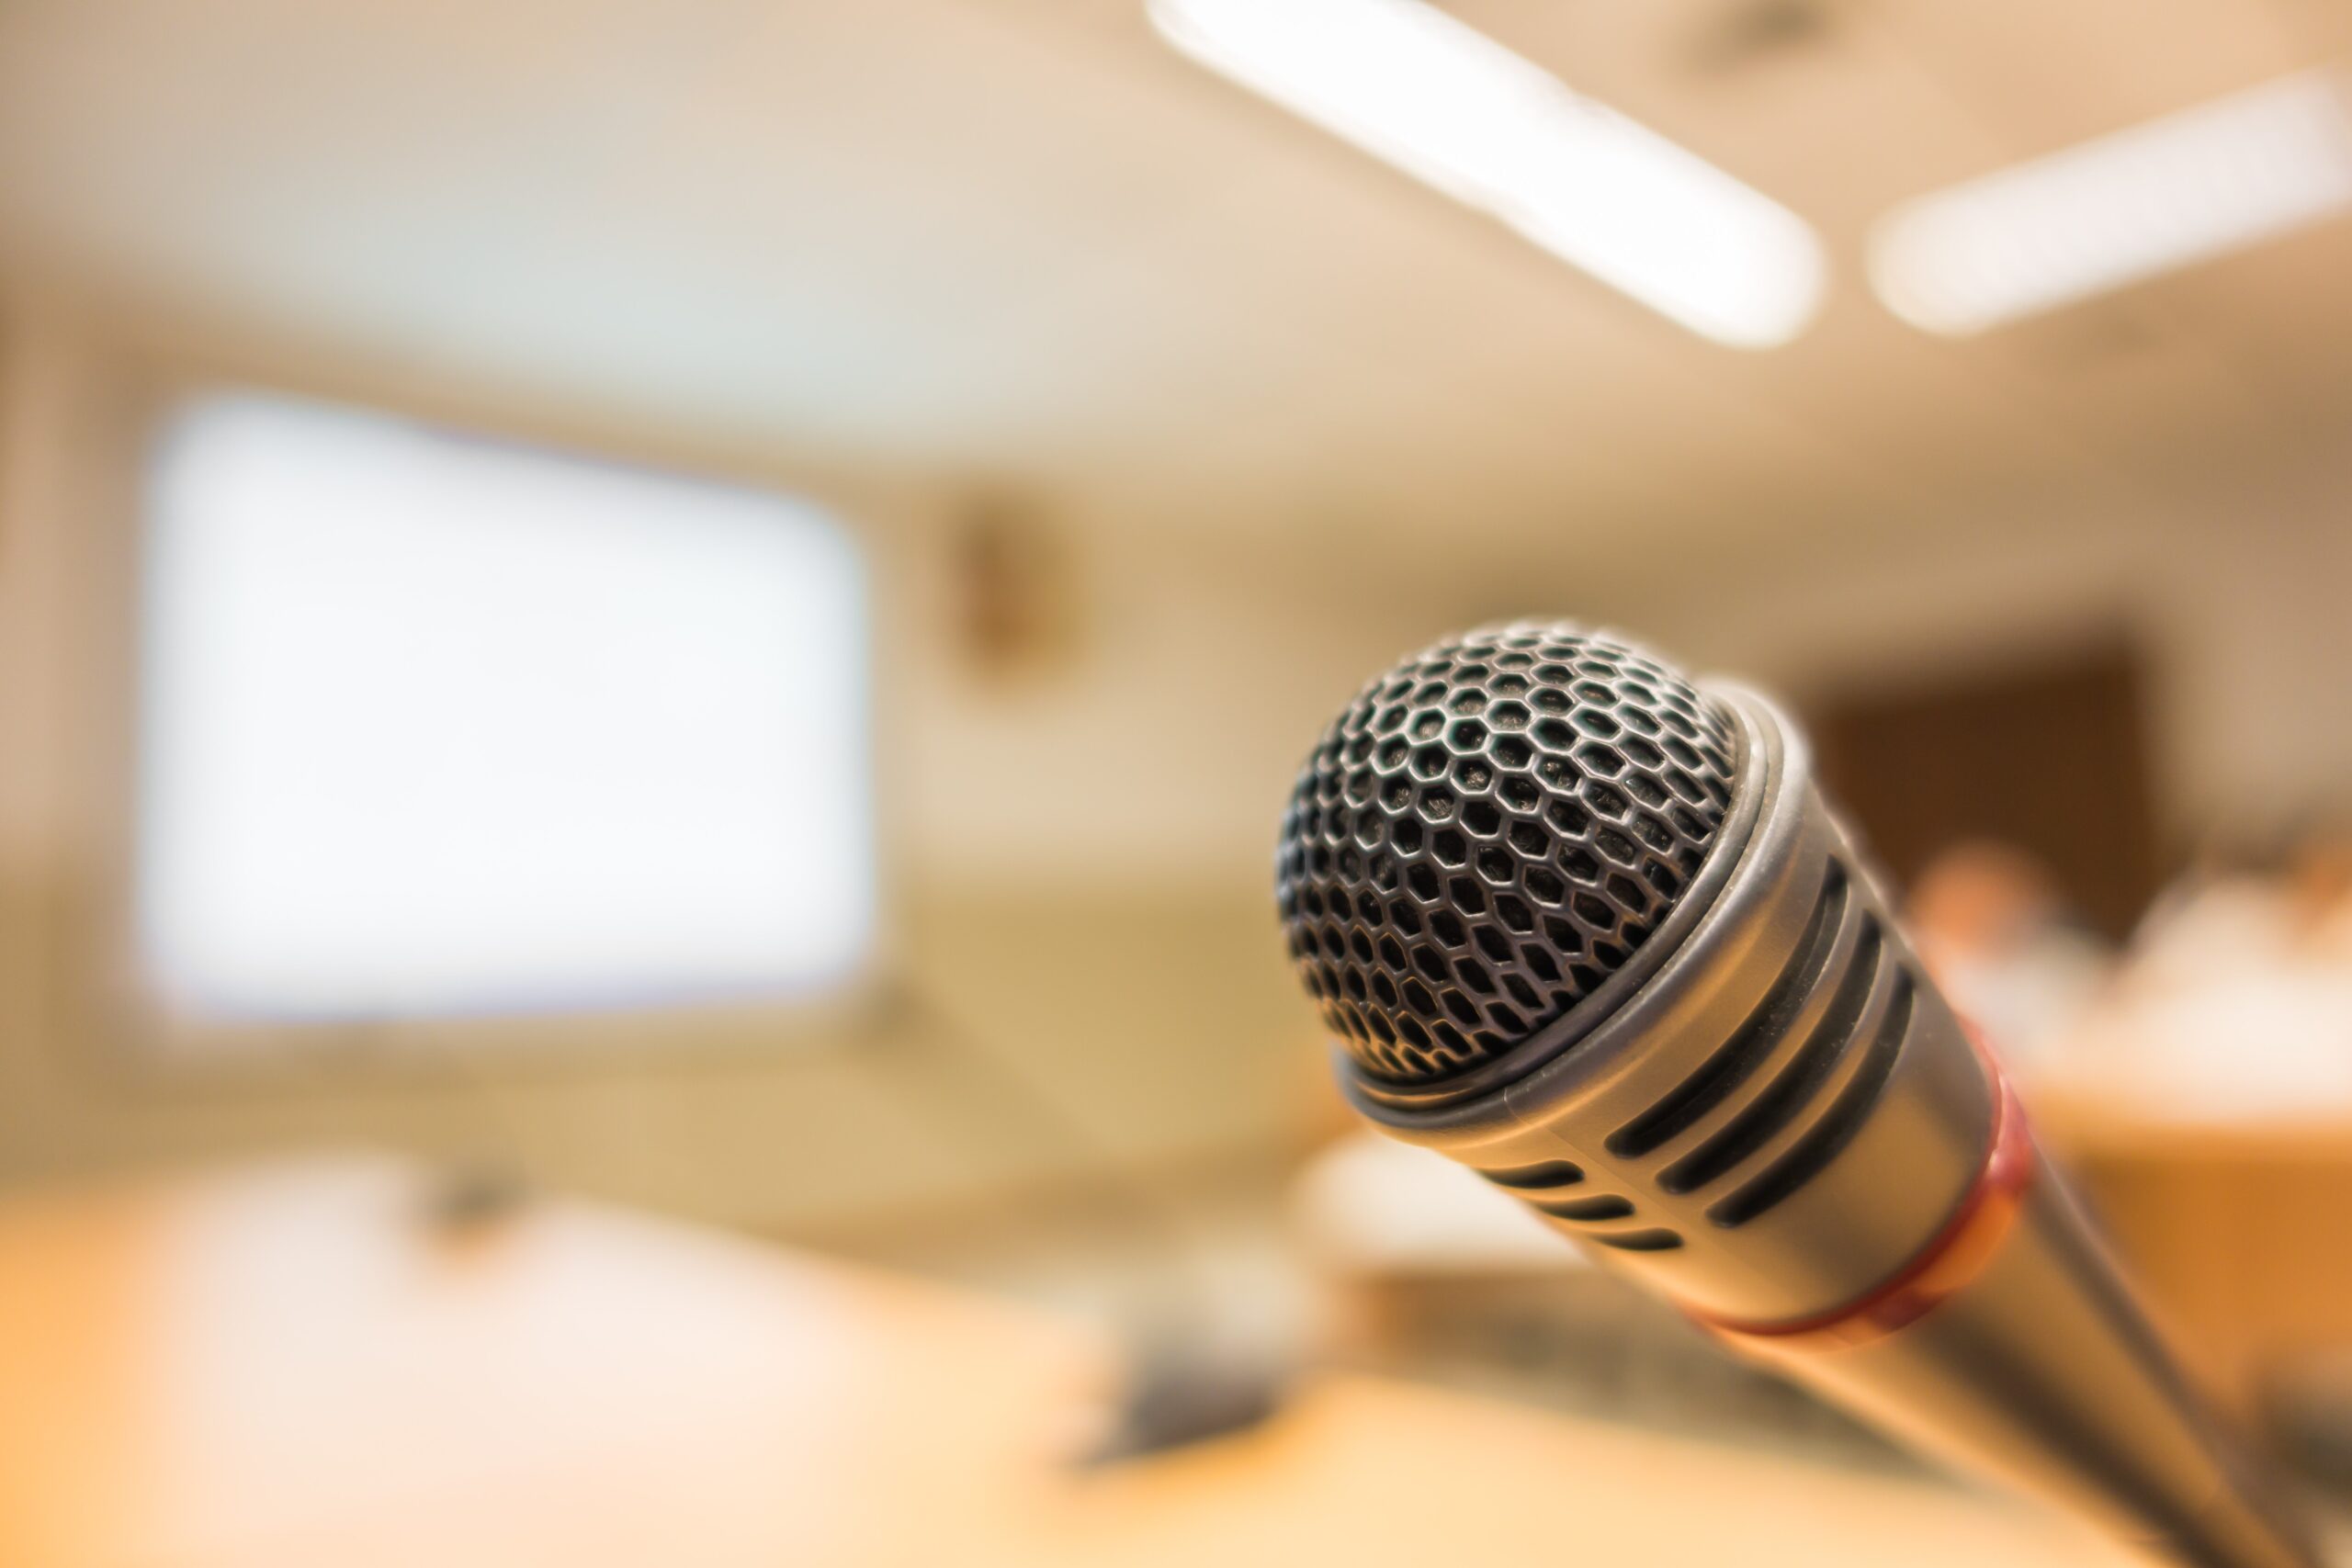 Photograph of a microphone infront of a conference room. The microphone is close to the camera, with the background heavily blurred. Overall a warm and inviting atmosphere.